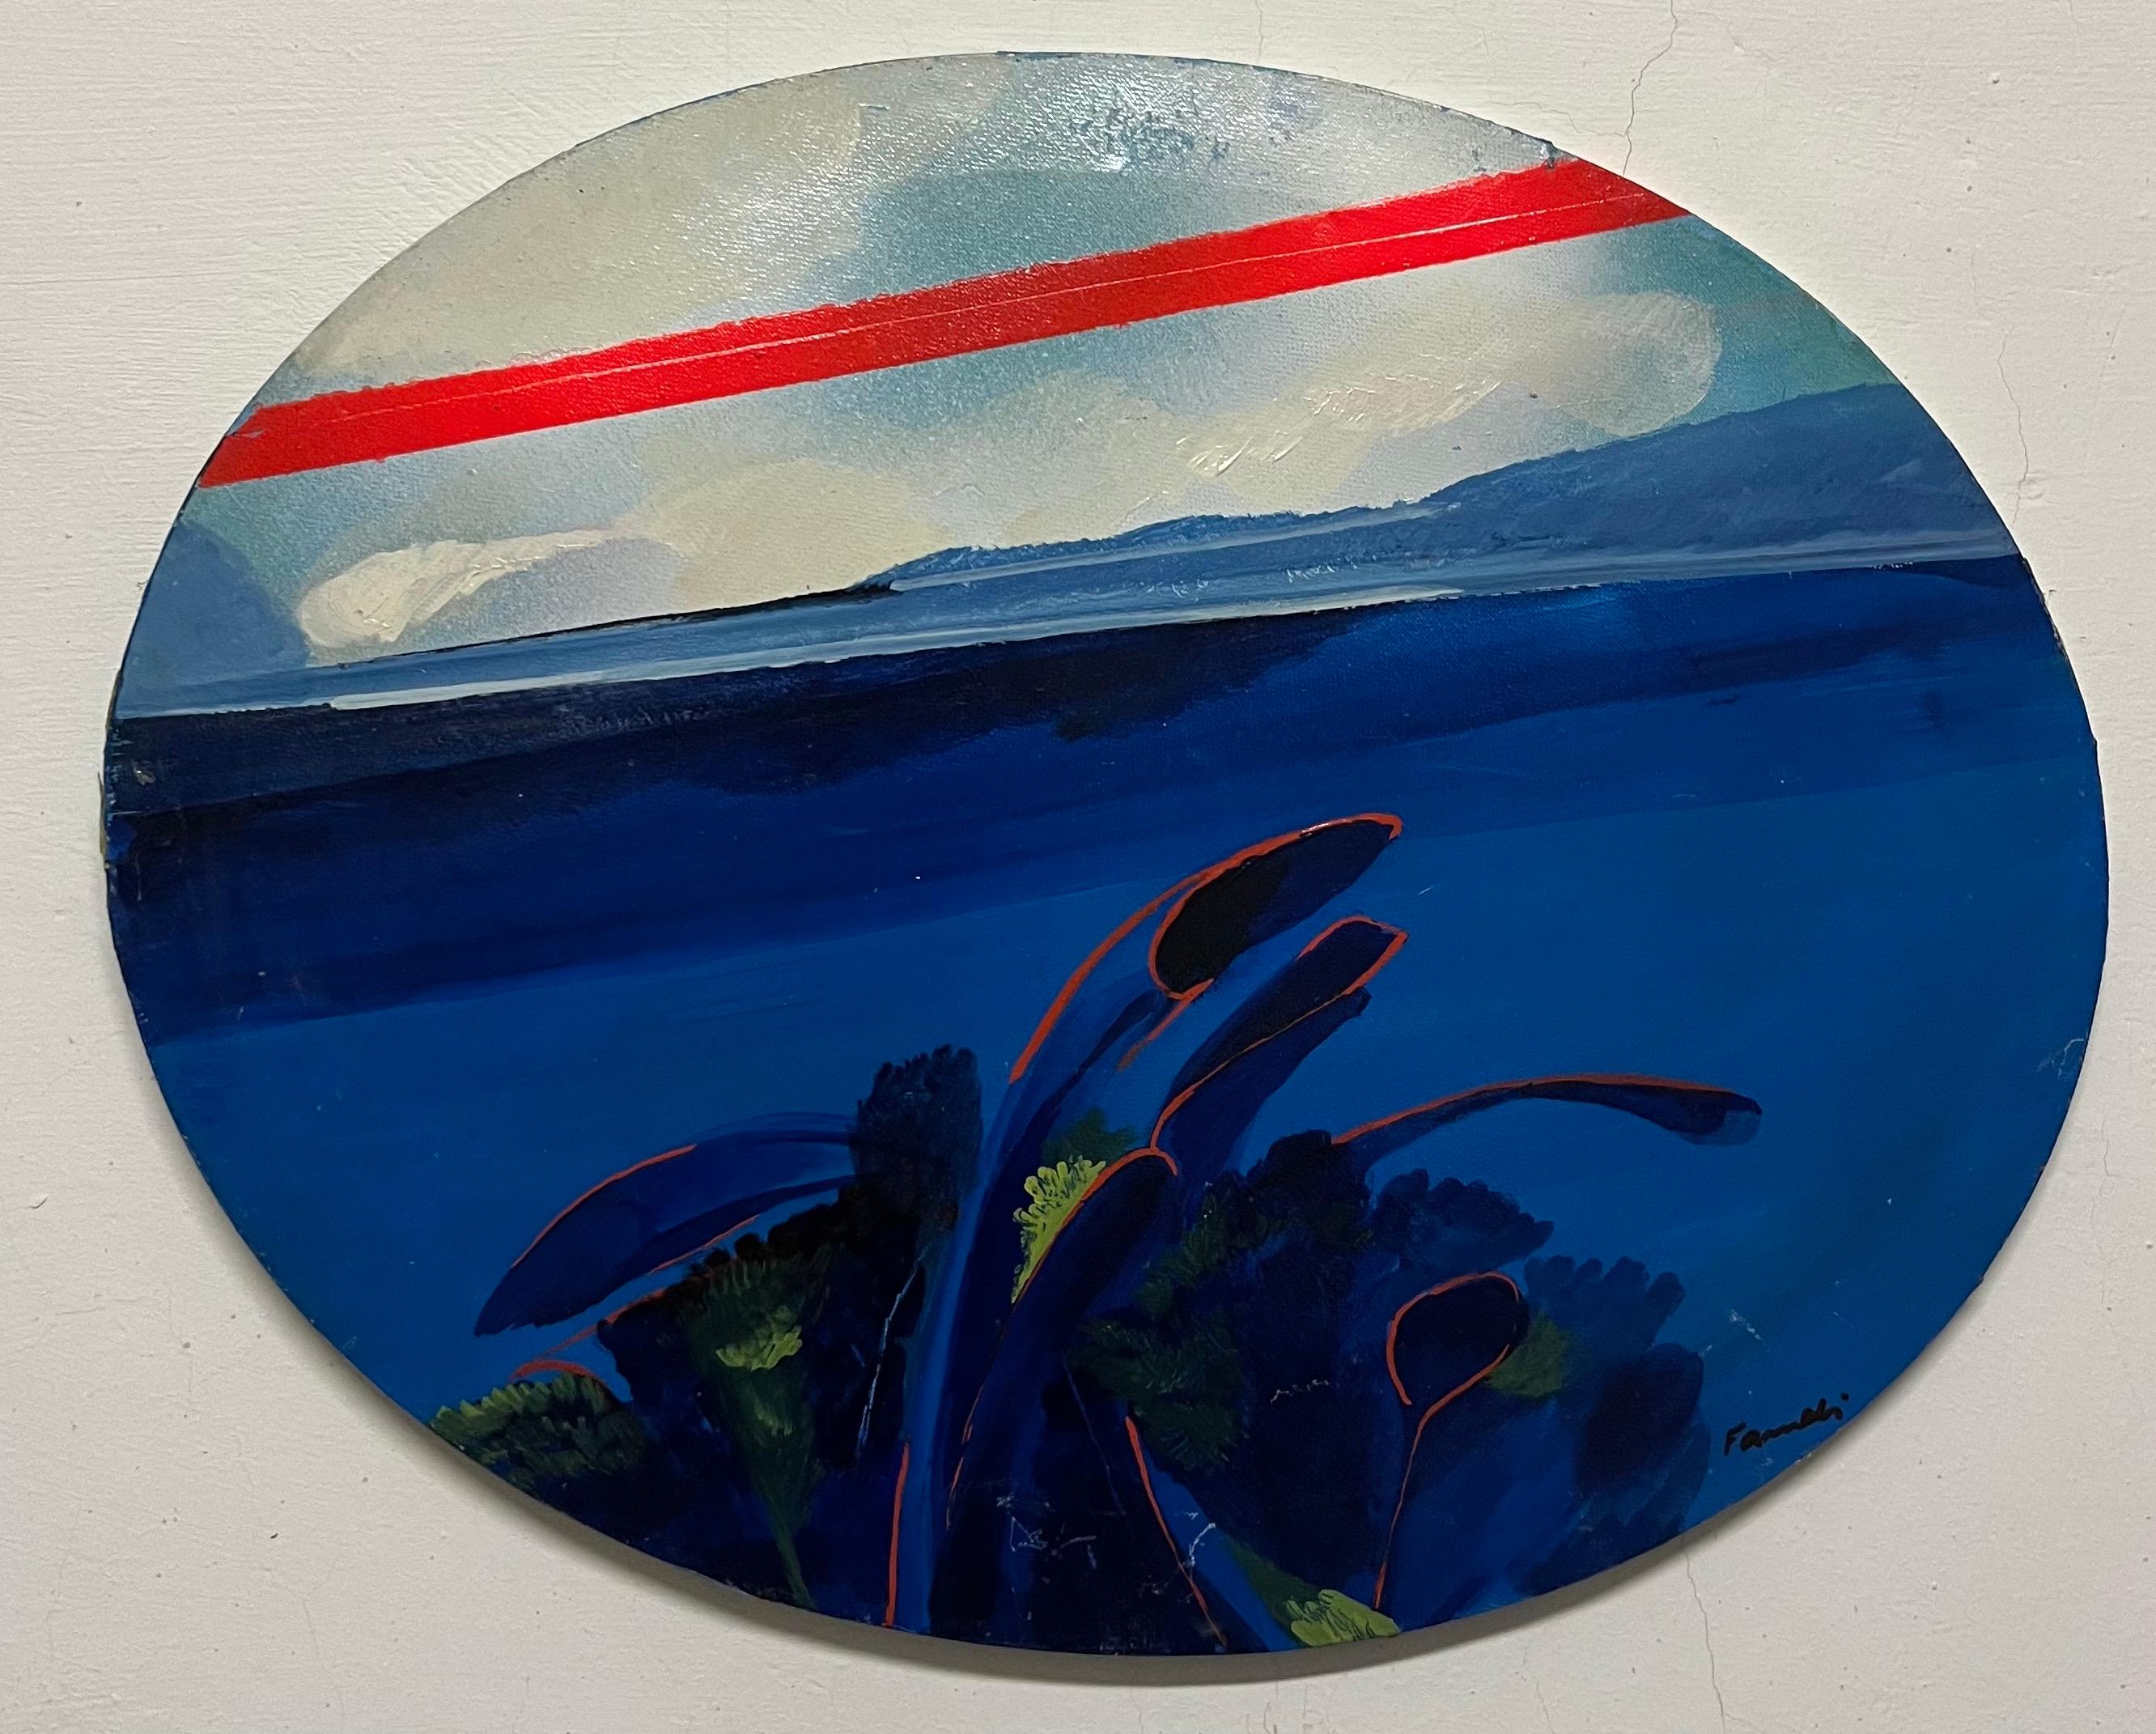 Fernando FARULLI Landscape Painting - "Islands in the distance-Tuscany-" Blue, Oval cm.50 x 40